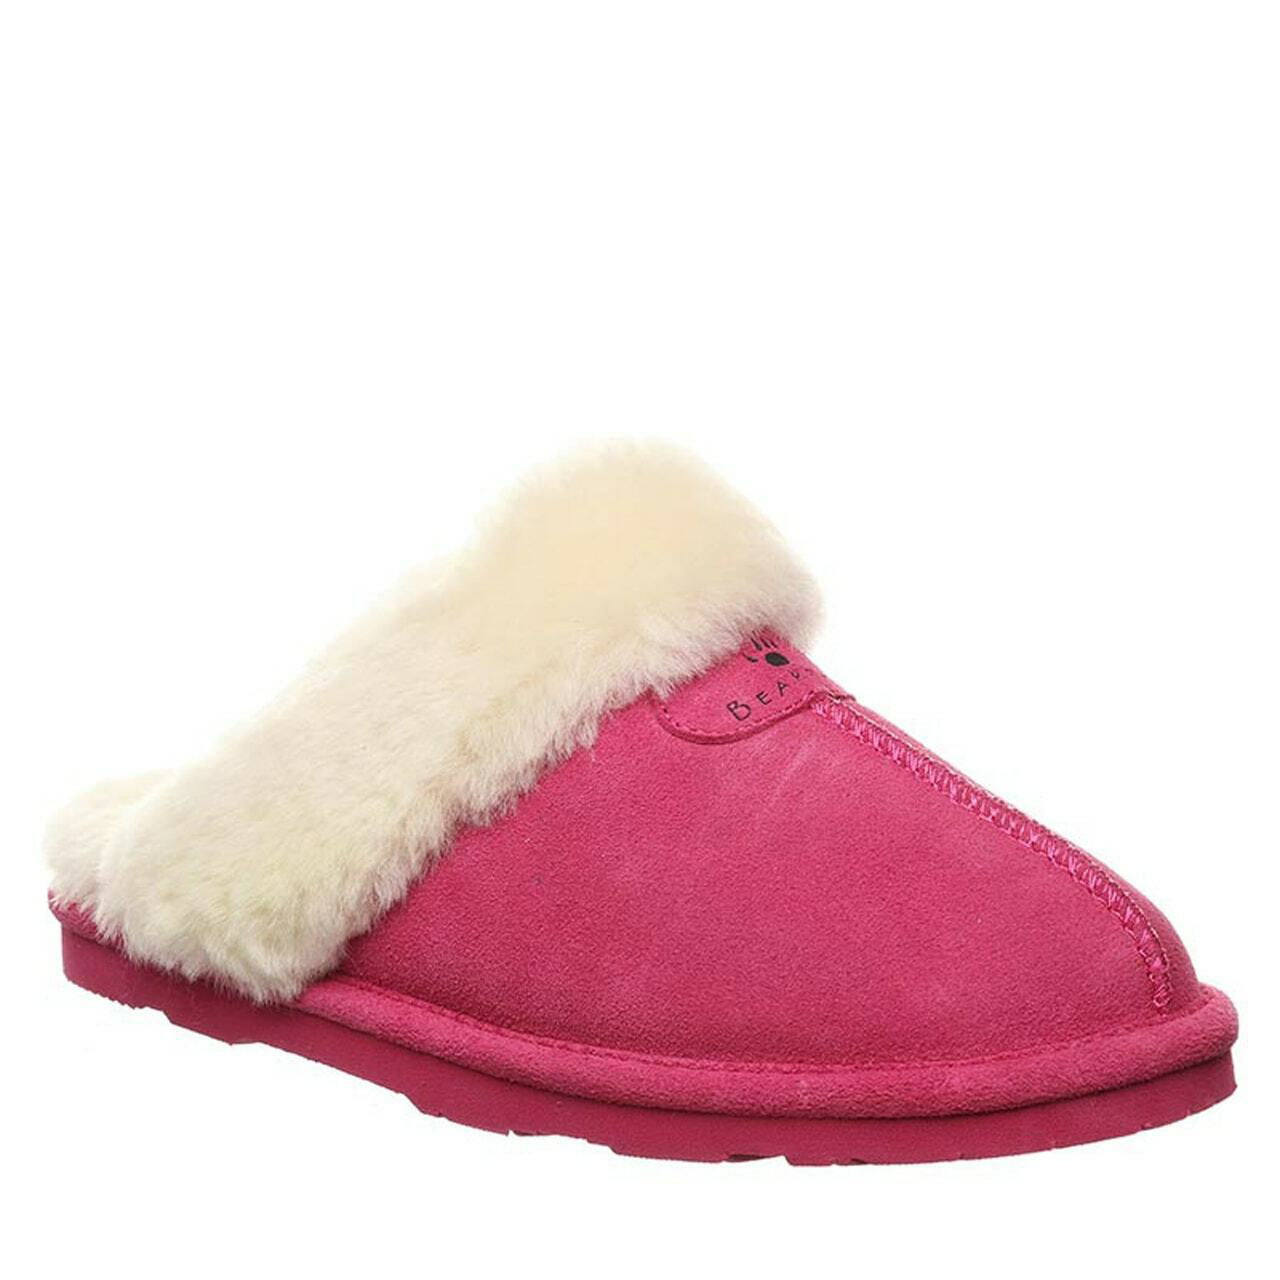 Mens Clark Slip On Slippers By Freestep Retail Price £19.99 